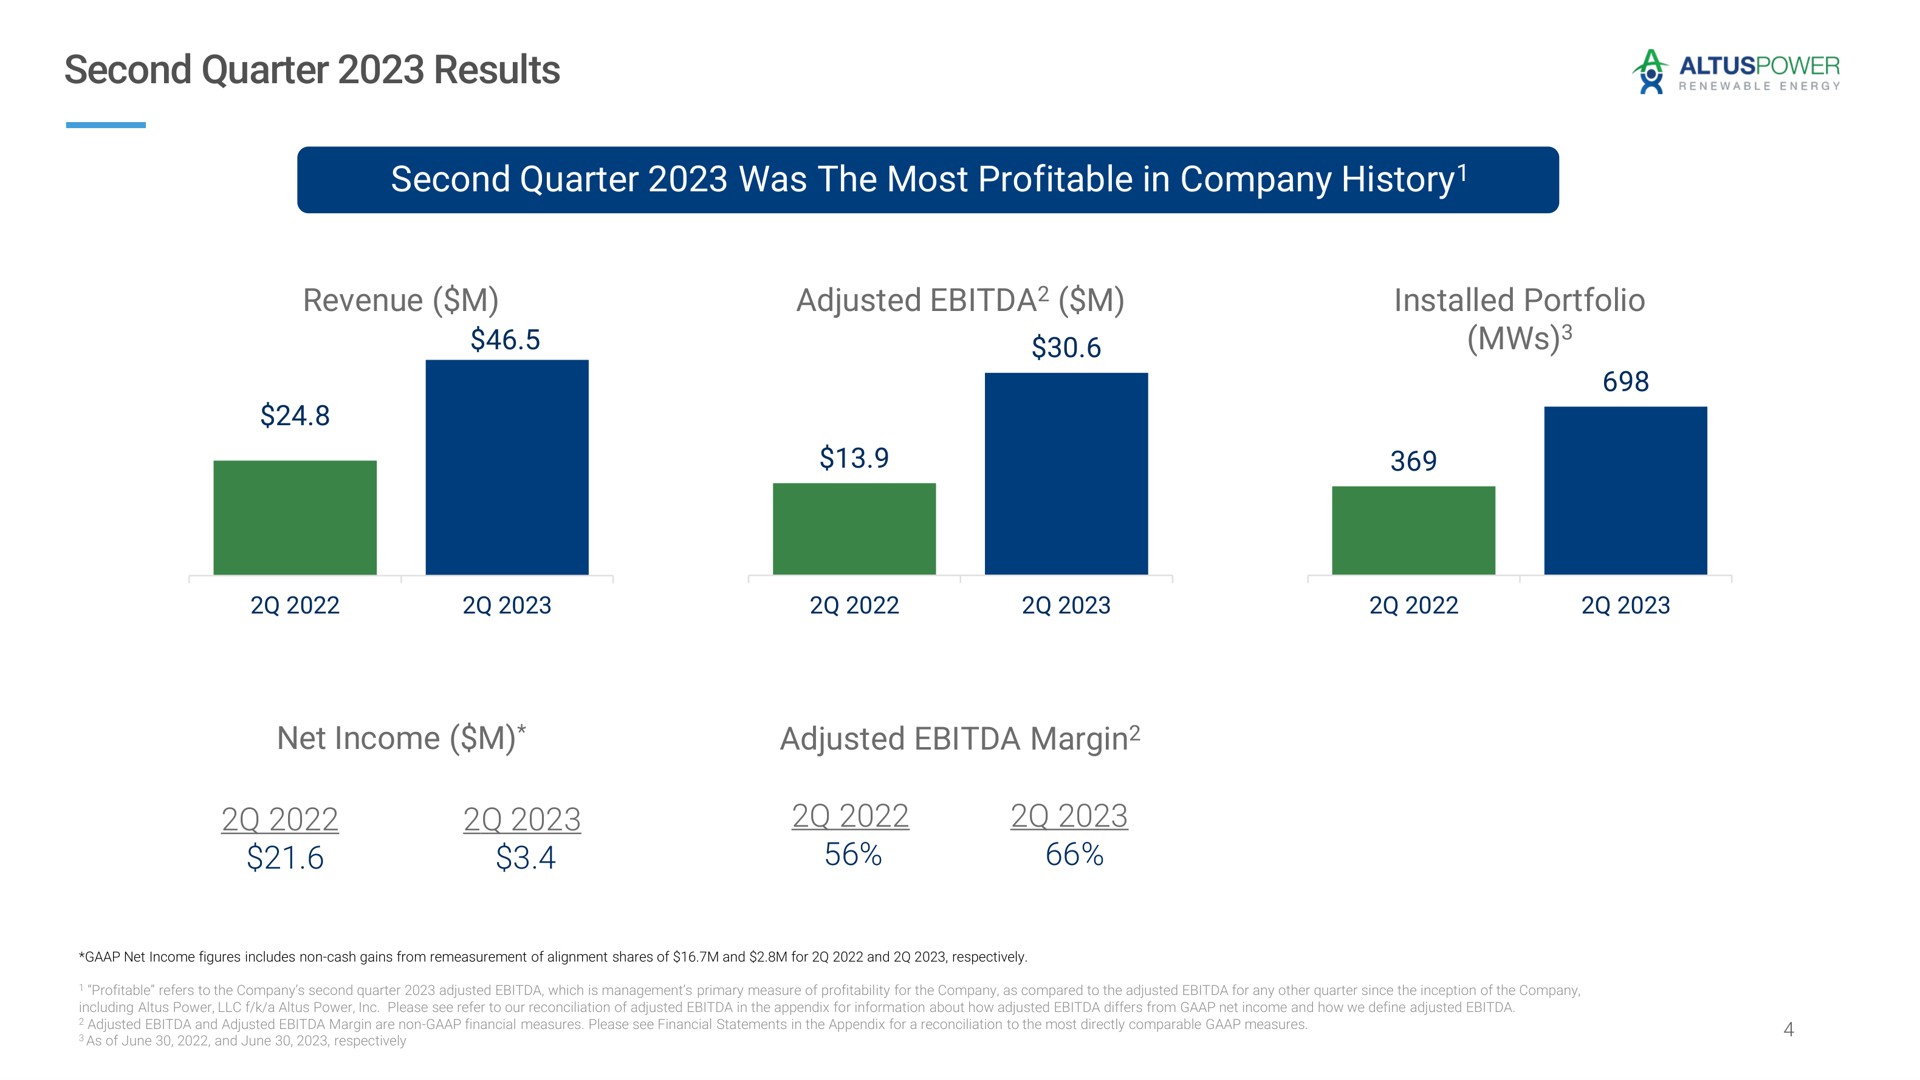 second quarter results second quarter was the most profitable in company history revenue adjusted portfolio net income adjusted margin history a margin | Altus Power